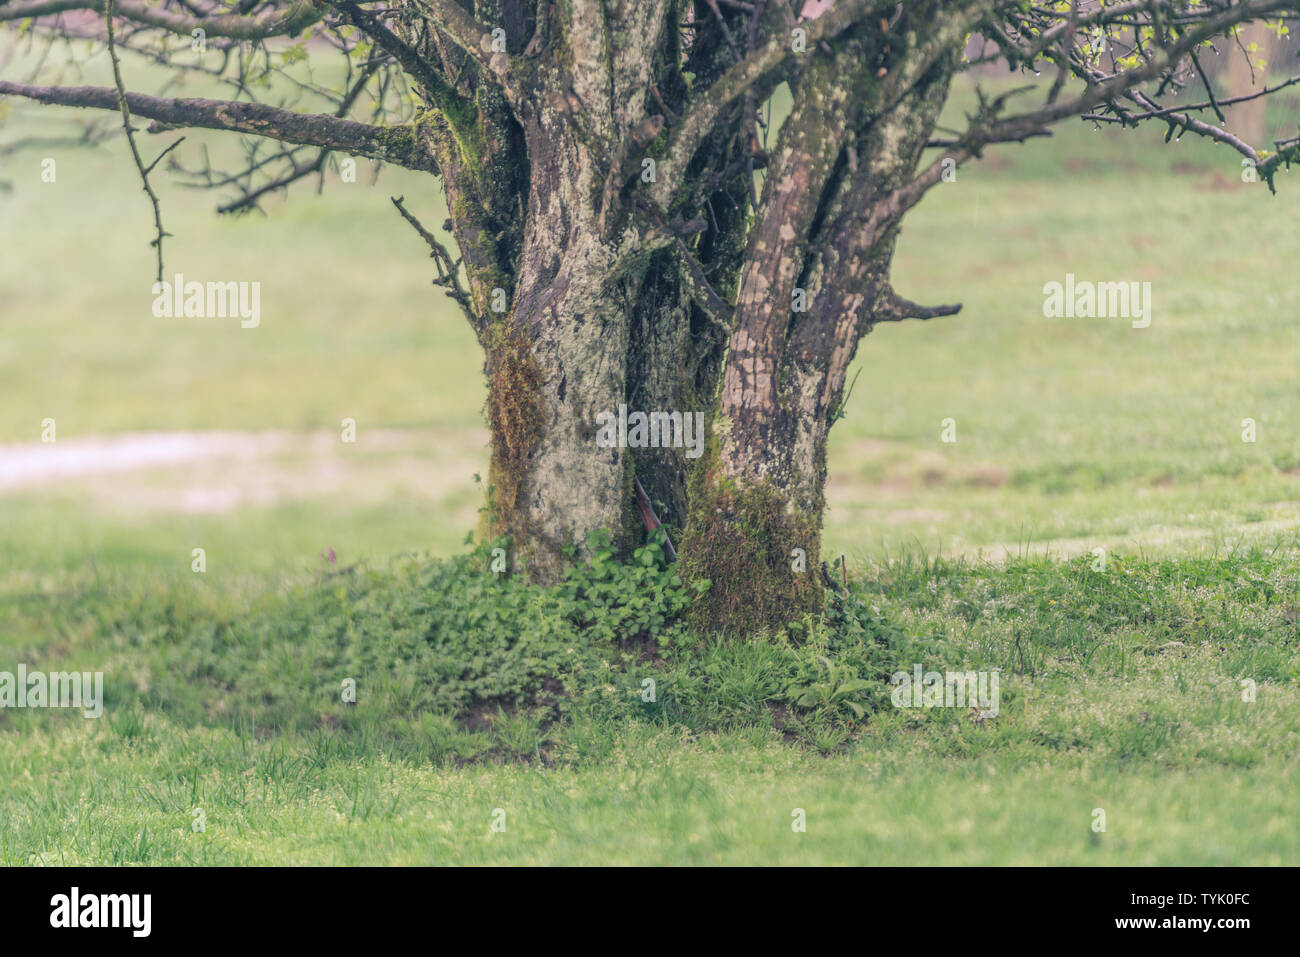 Green trees on grass roots The root of the trees green grass Stock Photo